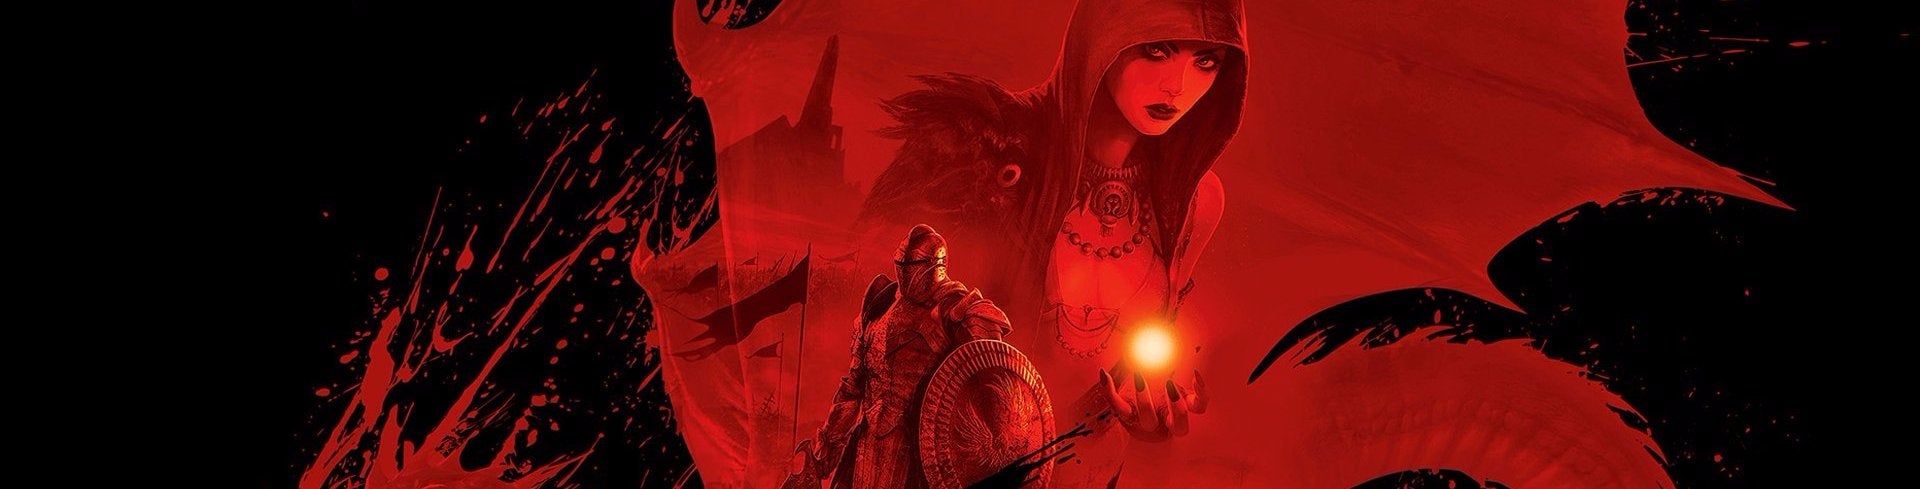 Image for Remembering Dragon Age: Origins